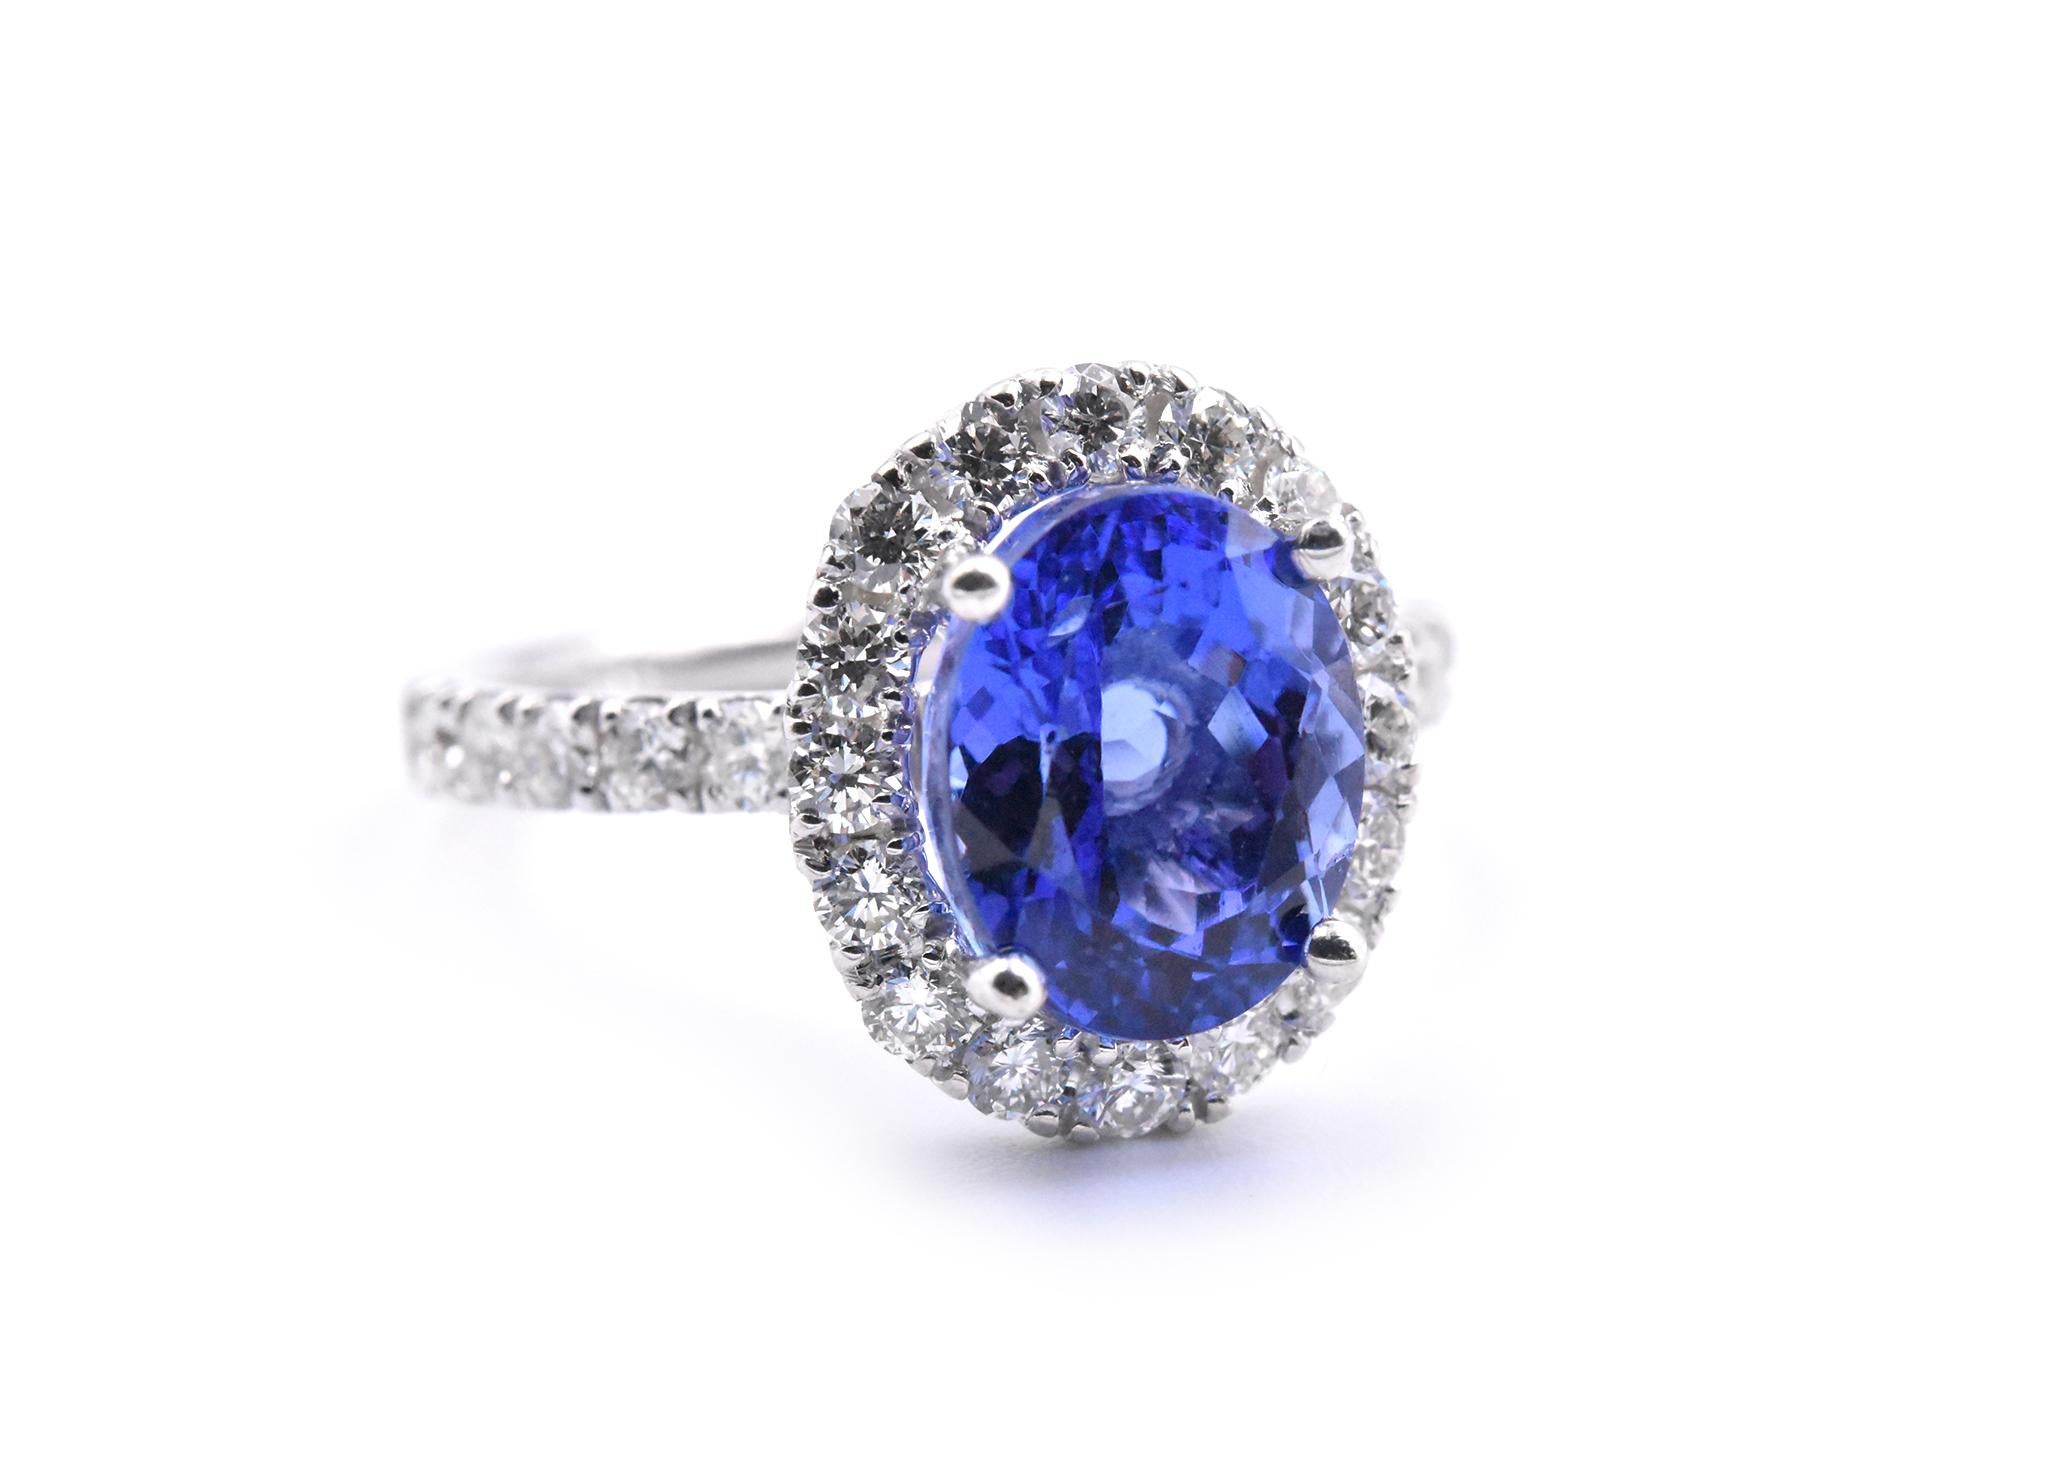 Designer: custom 
Material: 14k yellow gold
Tanzanite: 1 oval cut tanzanite = 3.28ct
Diamonds: 28 round brilliant cuts = 0.87cttw
Color: G-H
Clarity: VS2
Ring Size: 6 ½ (please allow two additional shipping days for sizing requests)
Dimensions: ring